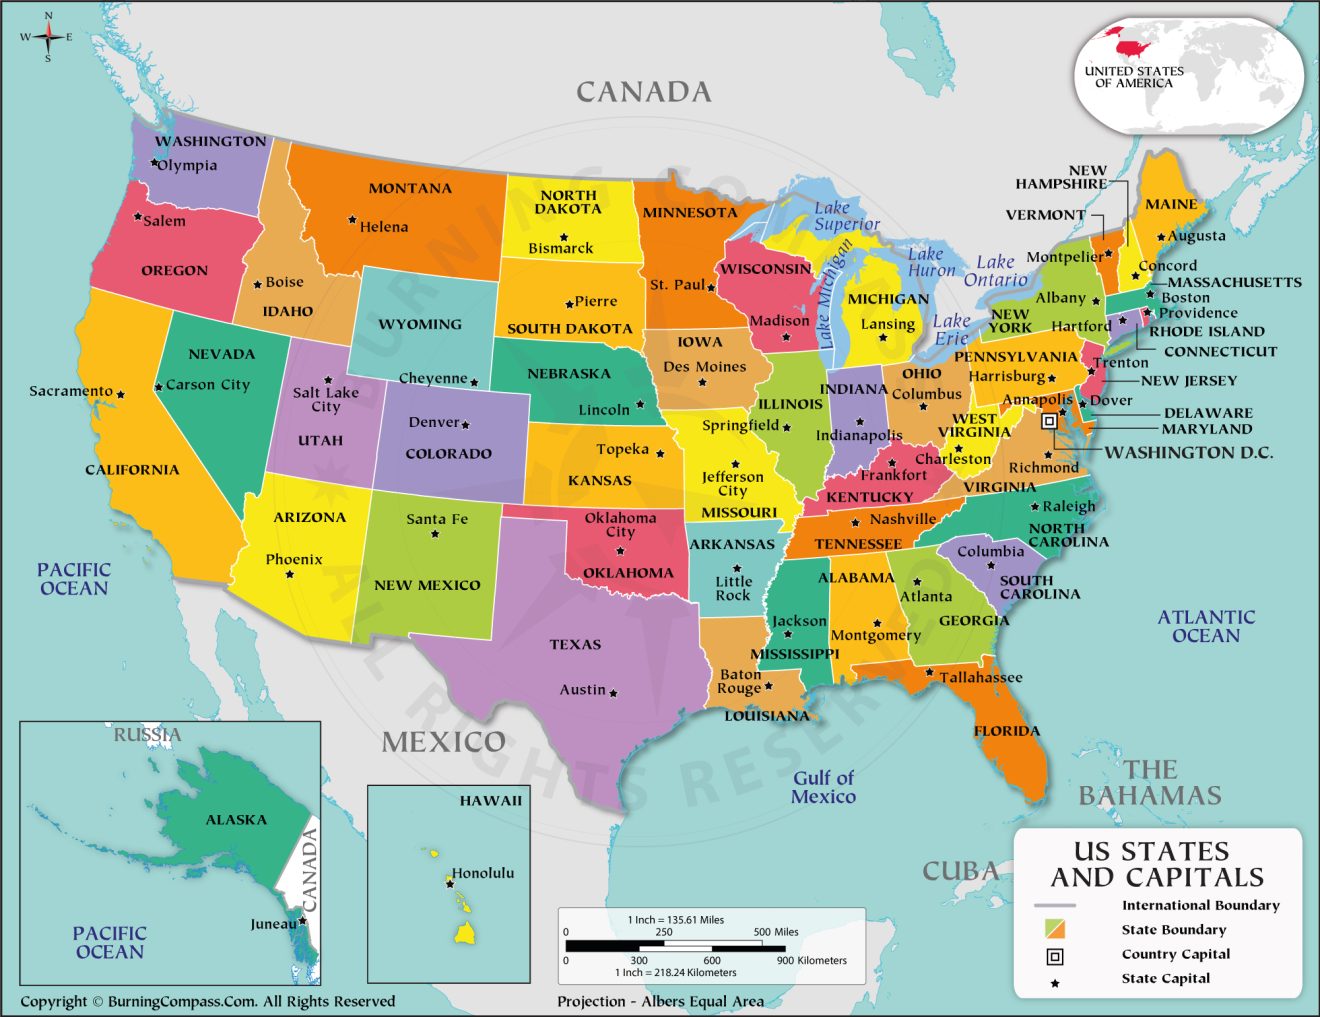 Buy United States Map with Capitals Online, Purchase US States and ...